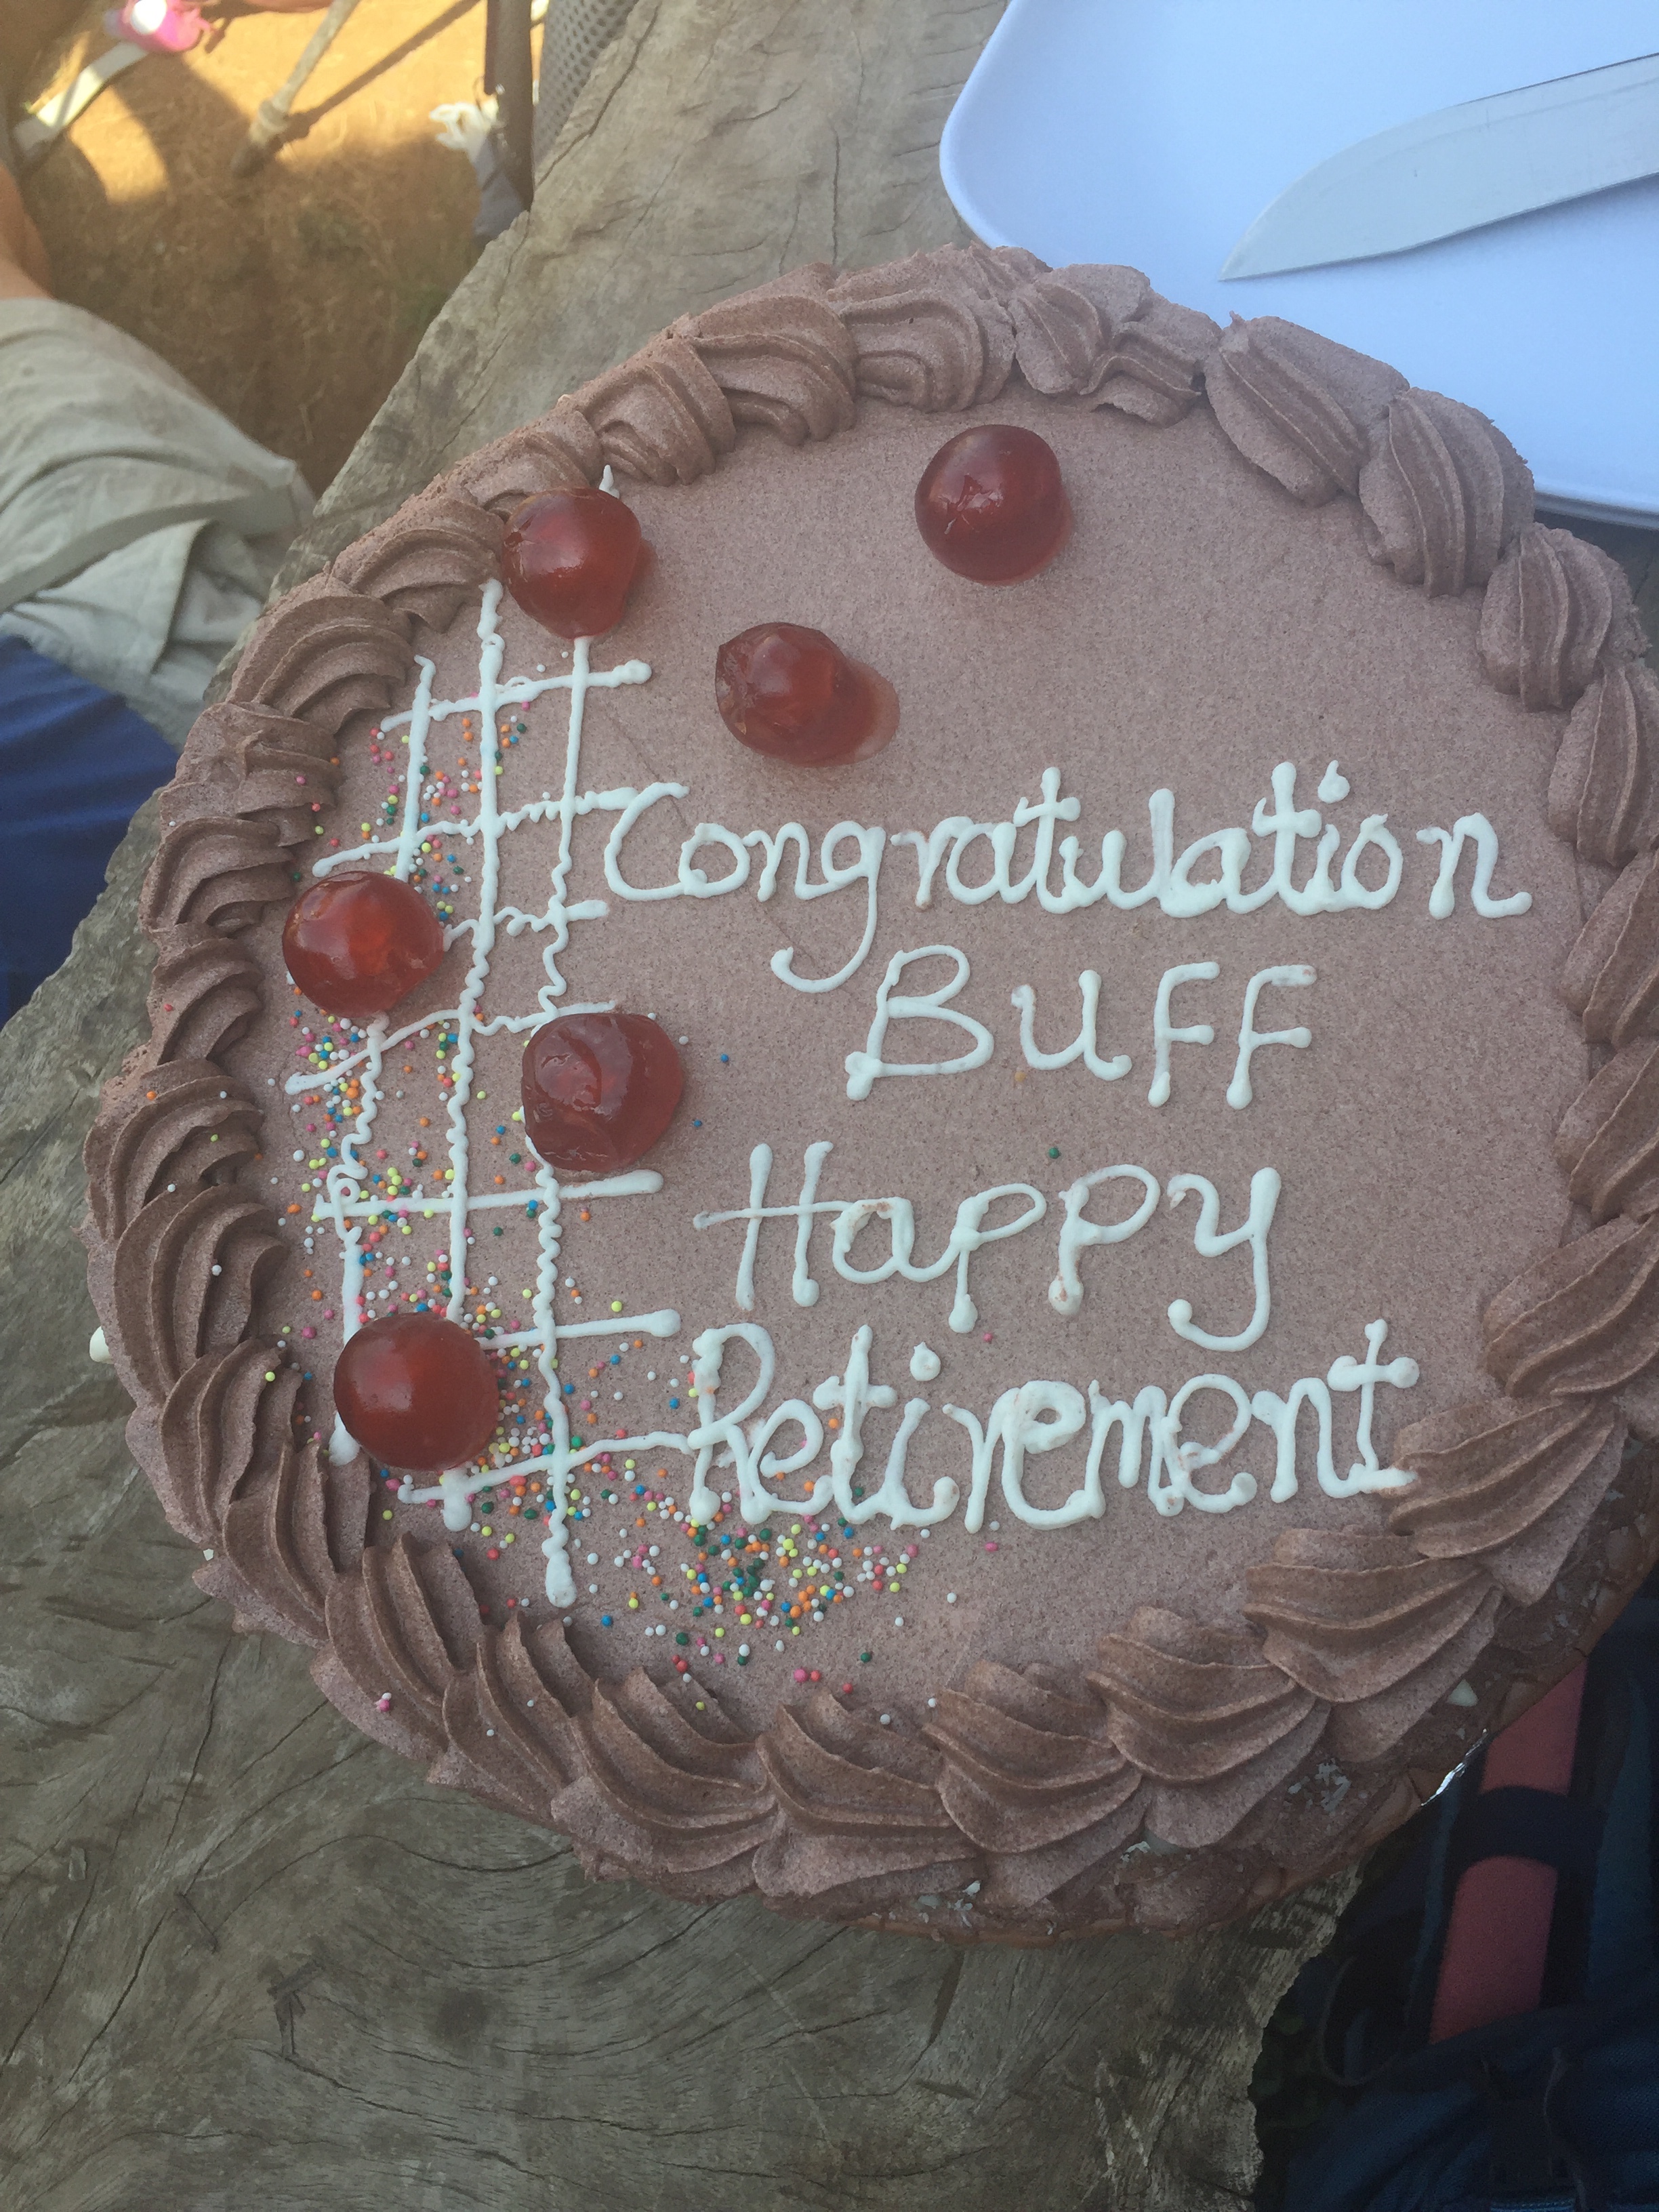 Laurel "Buff" Burkel celebrated her retirement from the Air Force on the summit of Kilimanjaro.